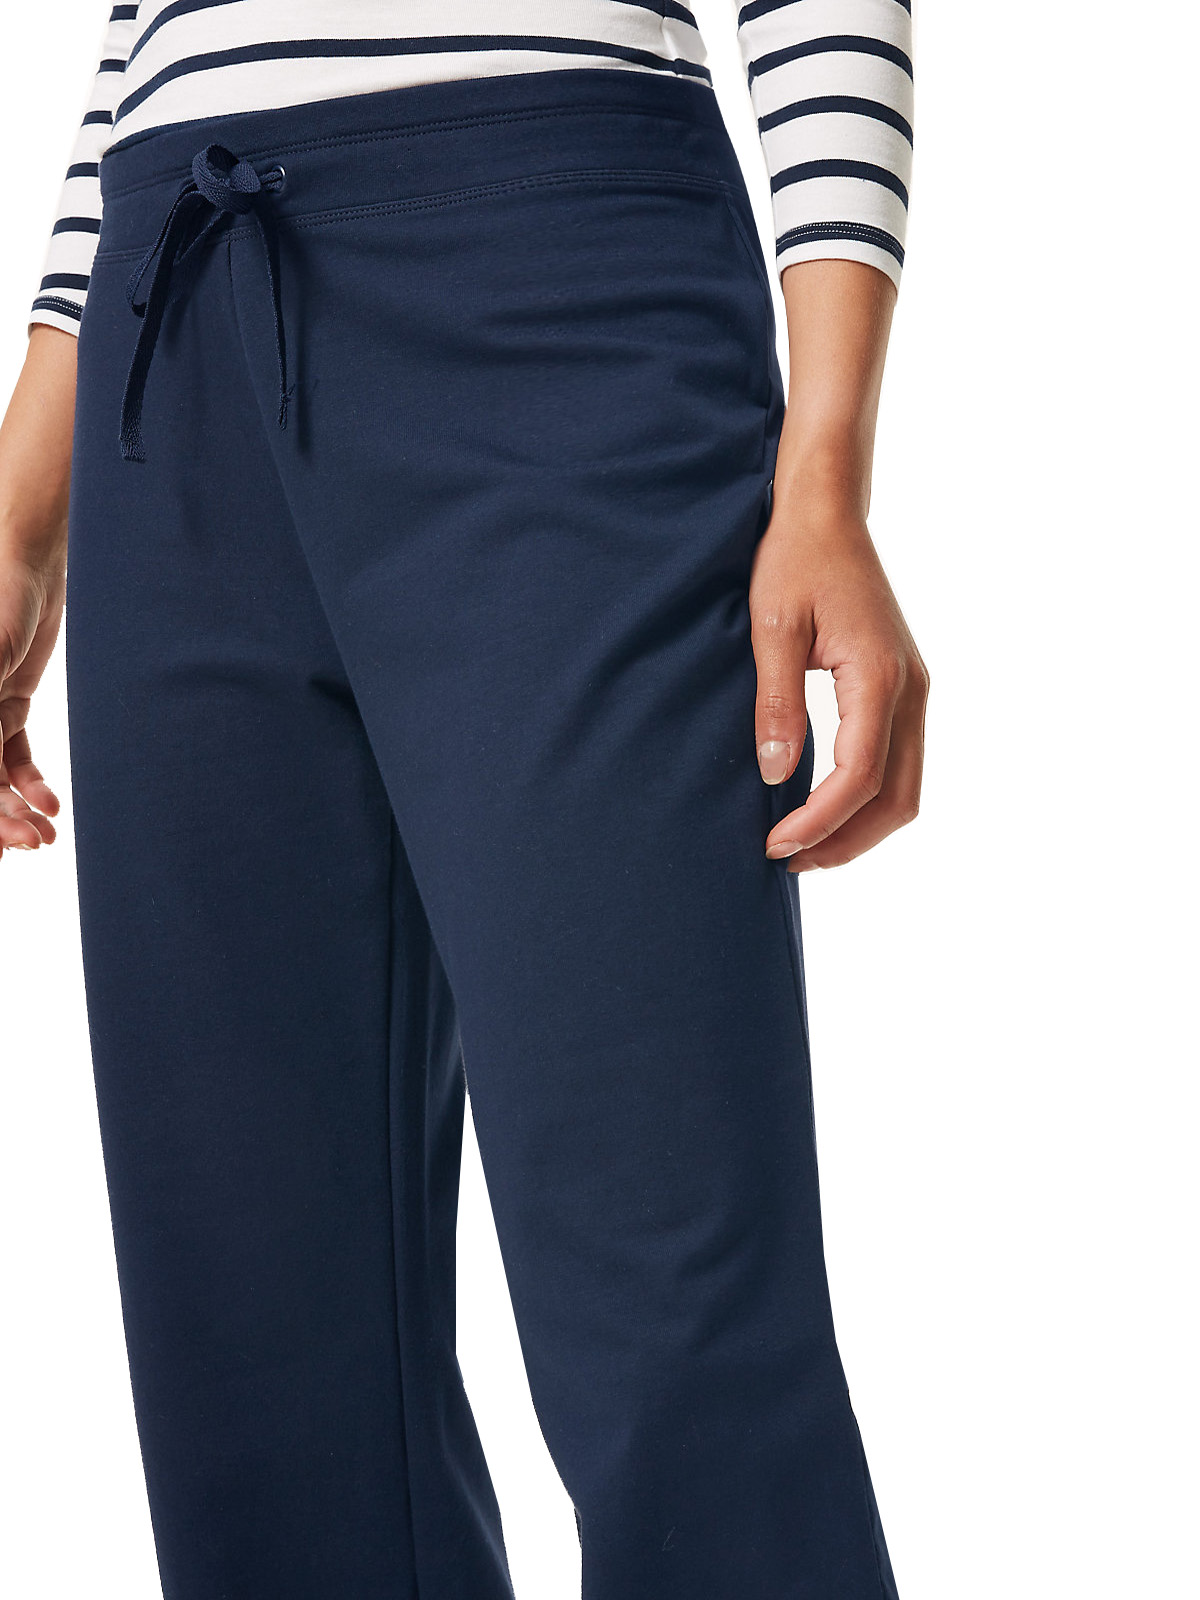 Marks and Spencer - - M&5 NAVY Cotton Rich Straight Leg Joggers - Size ...